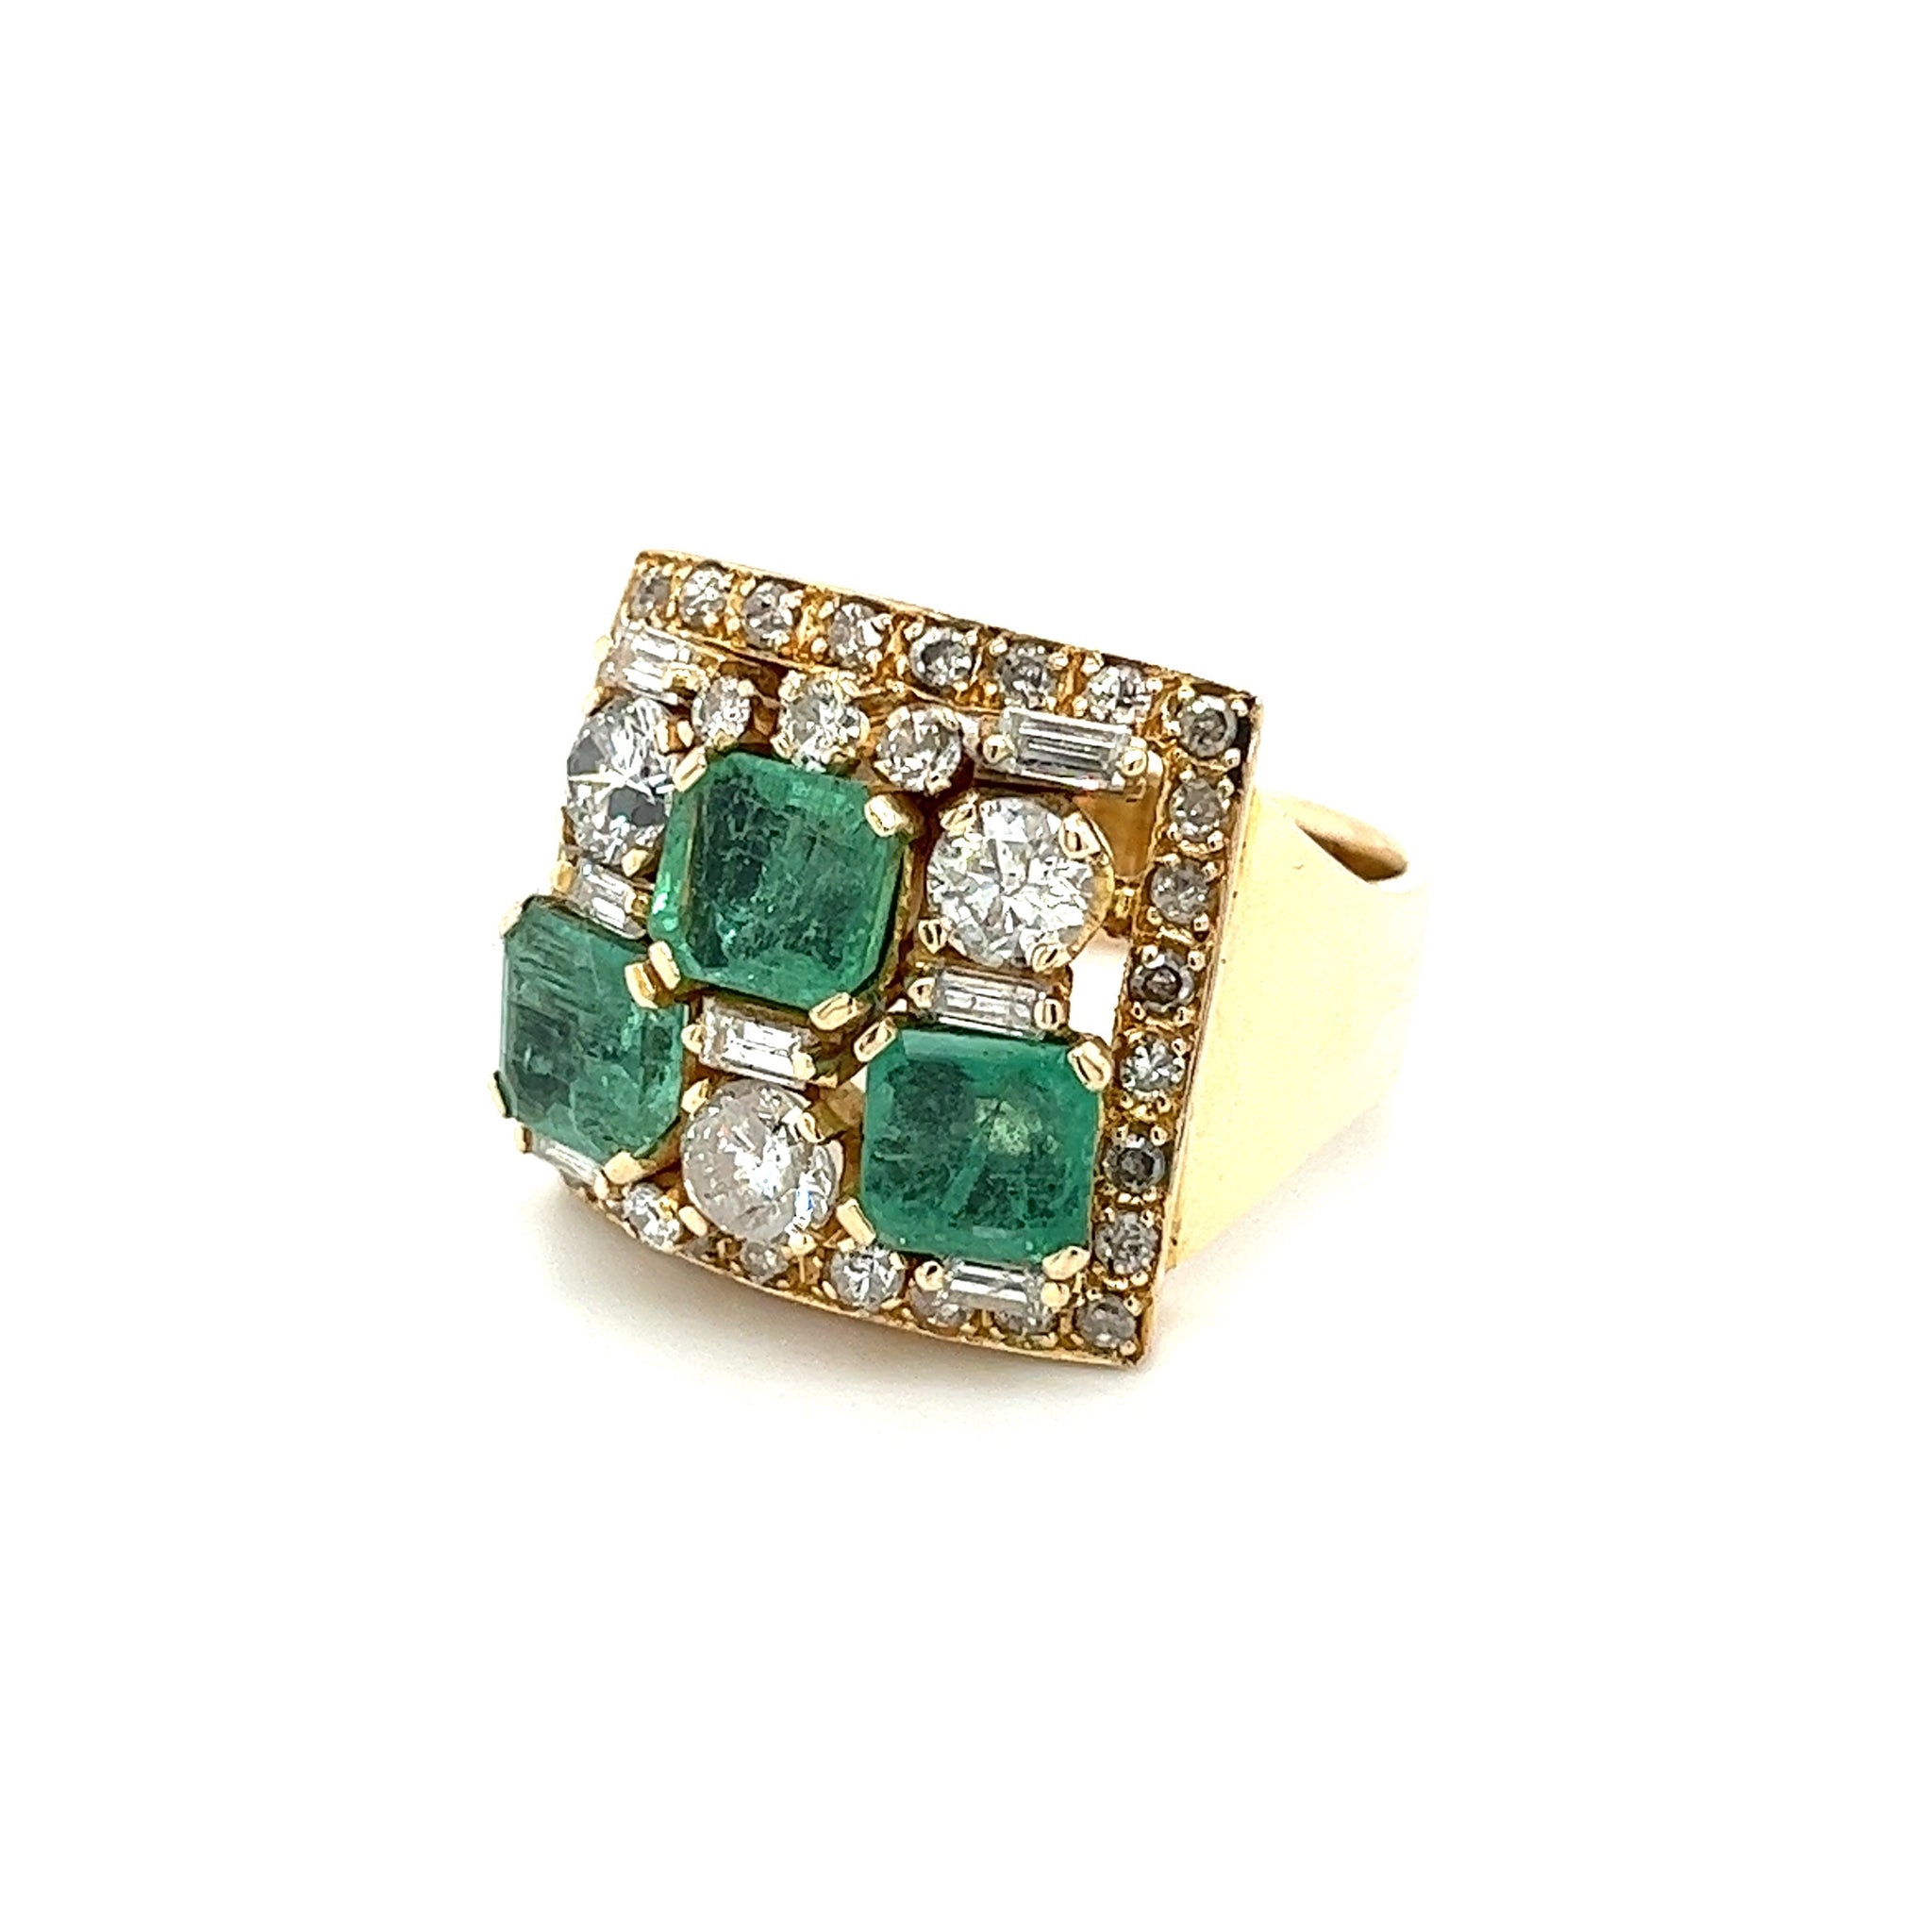 Vintage Natural Emerald & Diamond Earring and Ring Jewelry Set in 18K Gold-Jewelery Sets-ASSAY